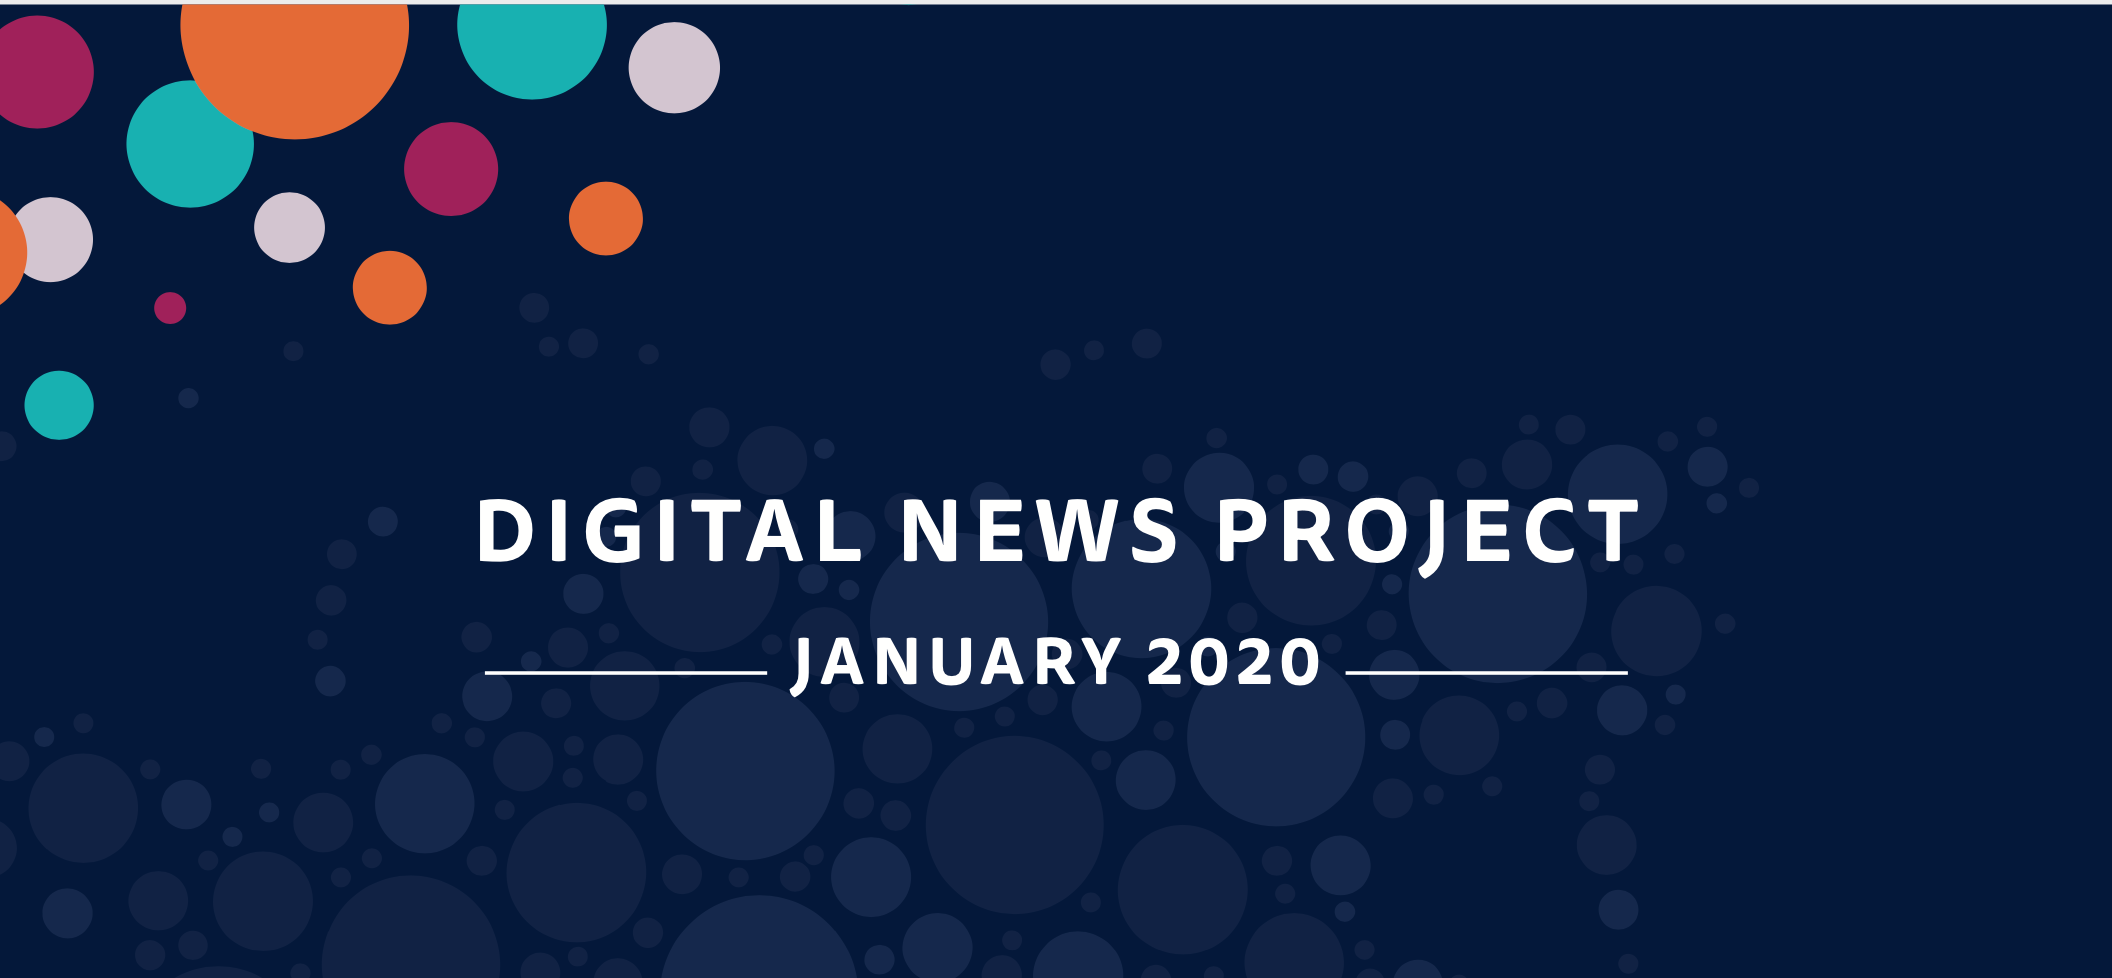 Journalism, Media, and Technology Trends and Predictions 2020 | REUTERS INSTITUTE